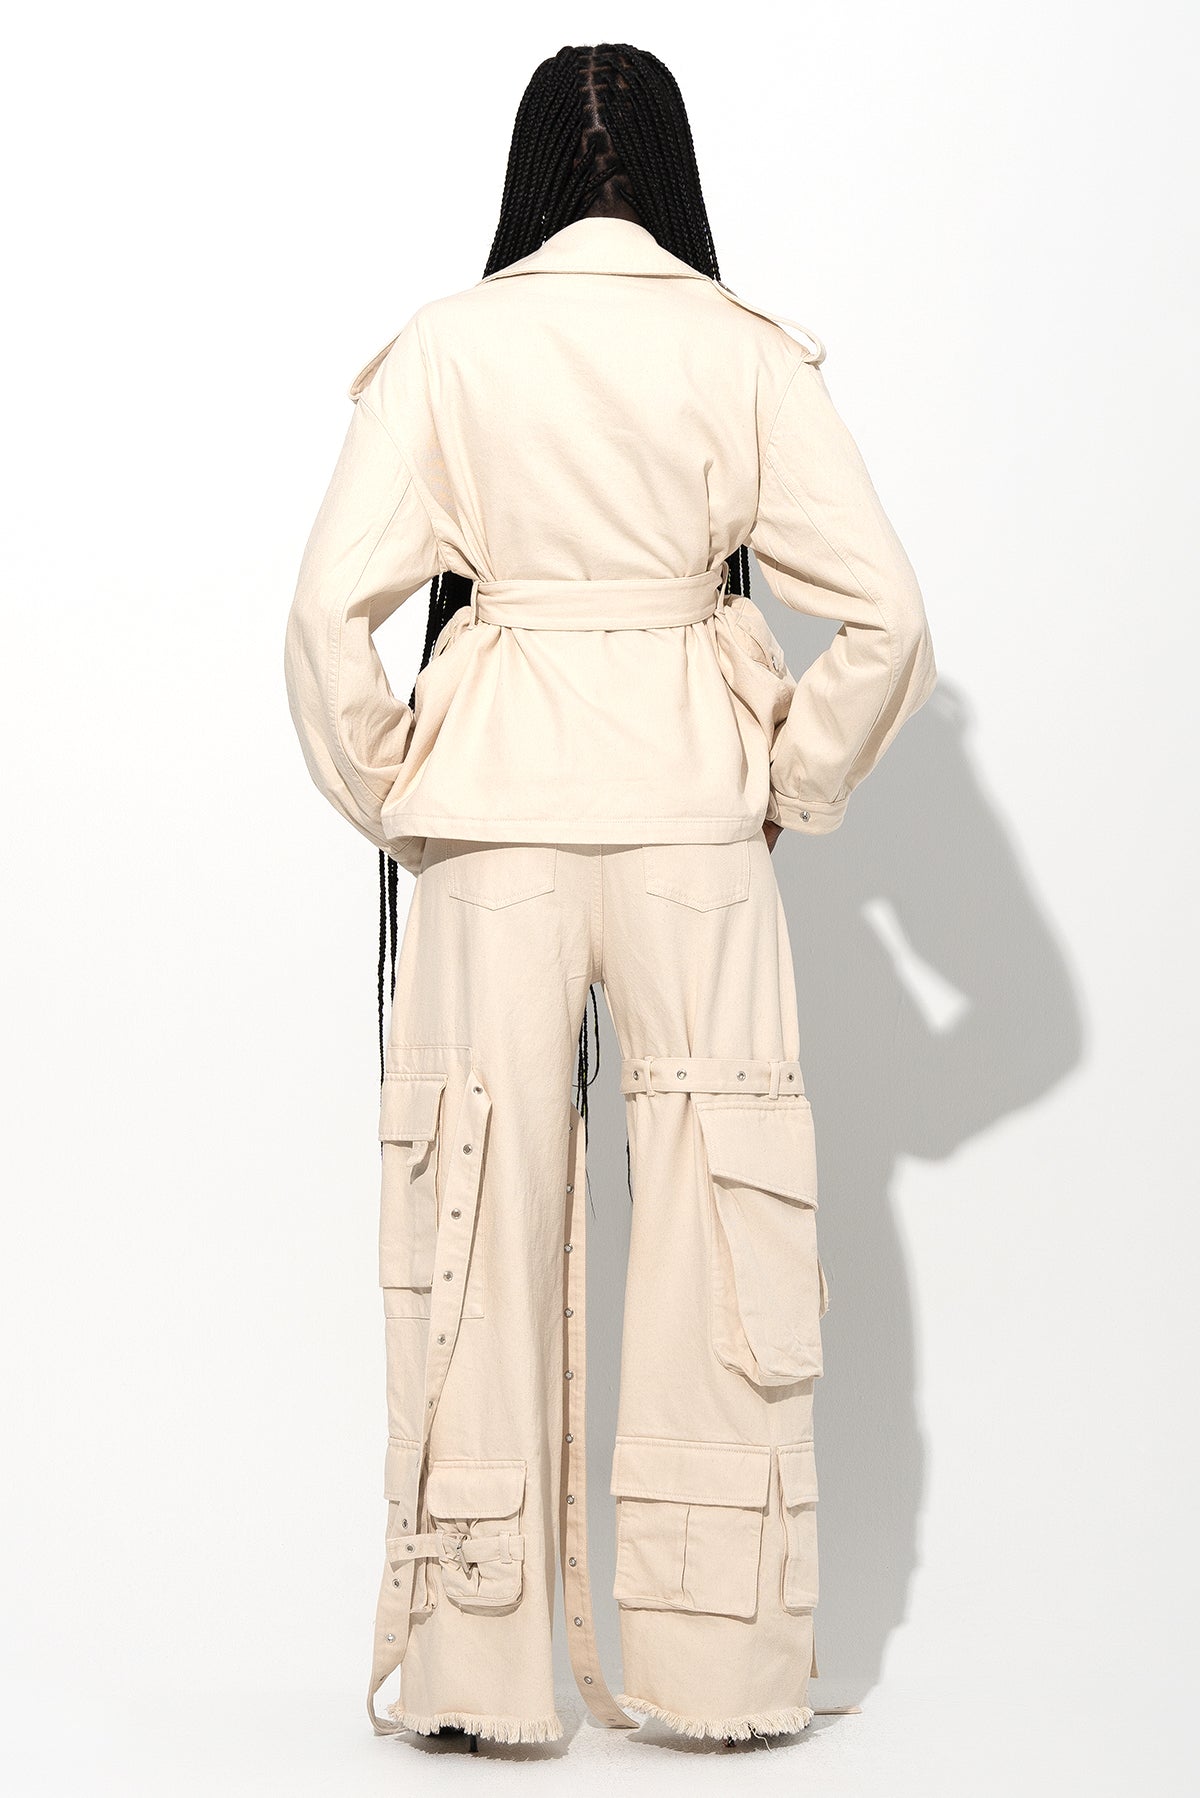 OFF-WHITE CROPPED TRENCH COAT marques almeida